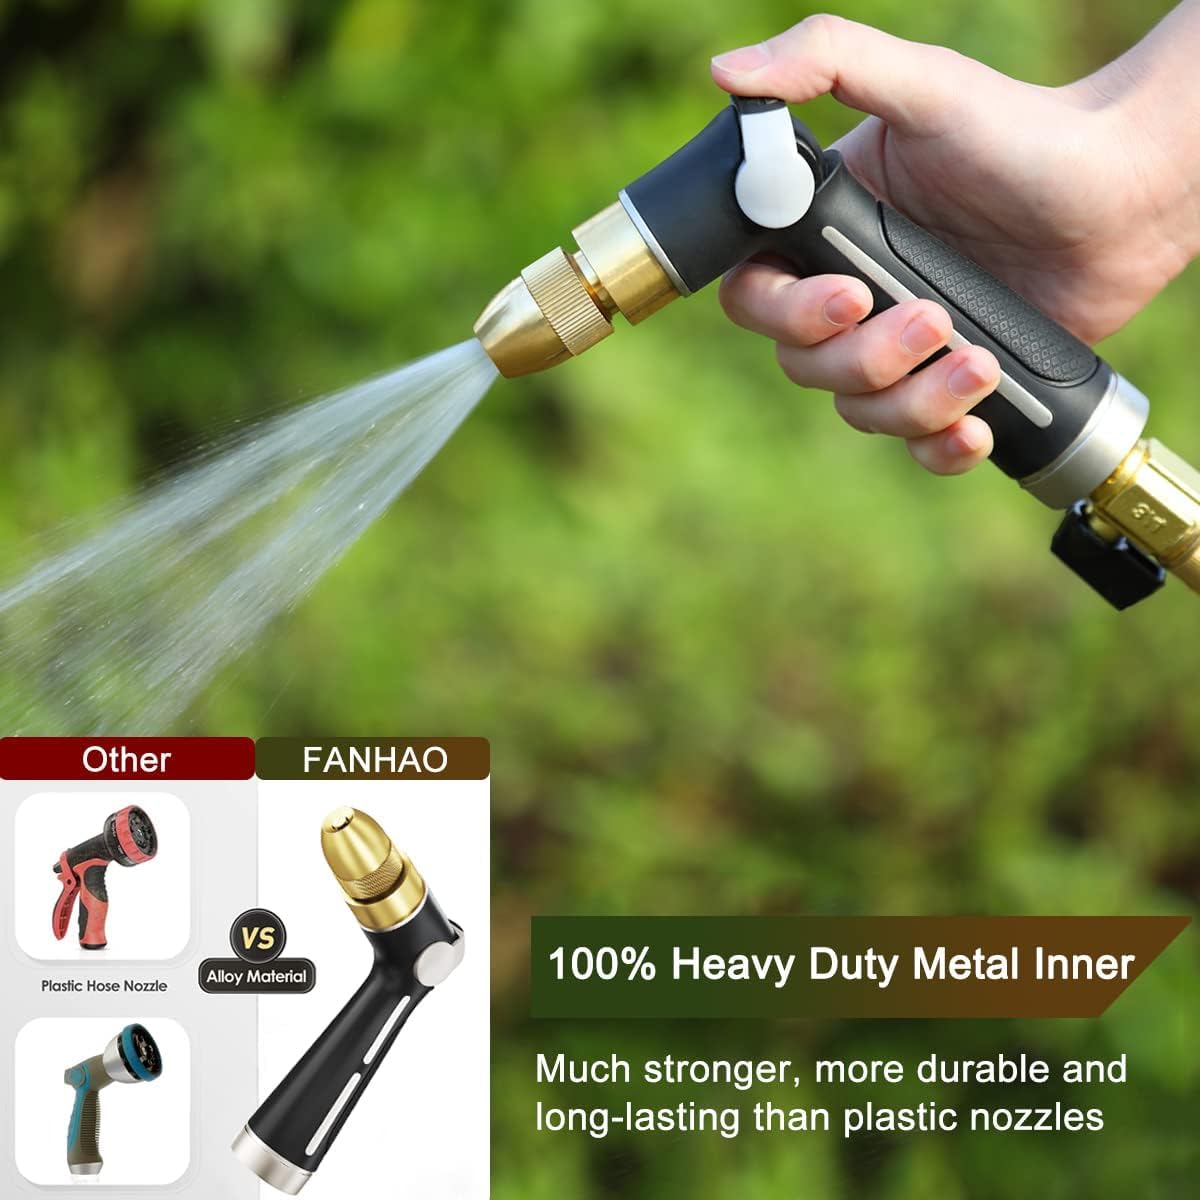 FANHAO Garden Hose Nozzle with High Pressure Jet, 100% Heavy Duty Metal Water Hose Sprayer, Thumb Flow Control, On Off Valve, 4 Spray Patterns for Garden Watering, Car and Pet Washing